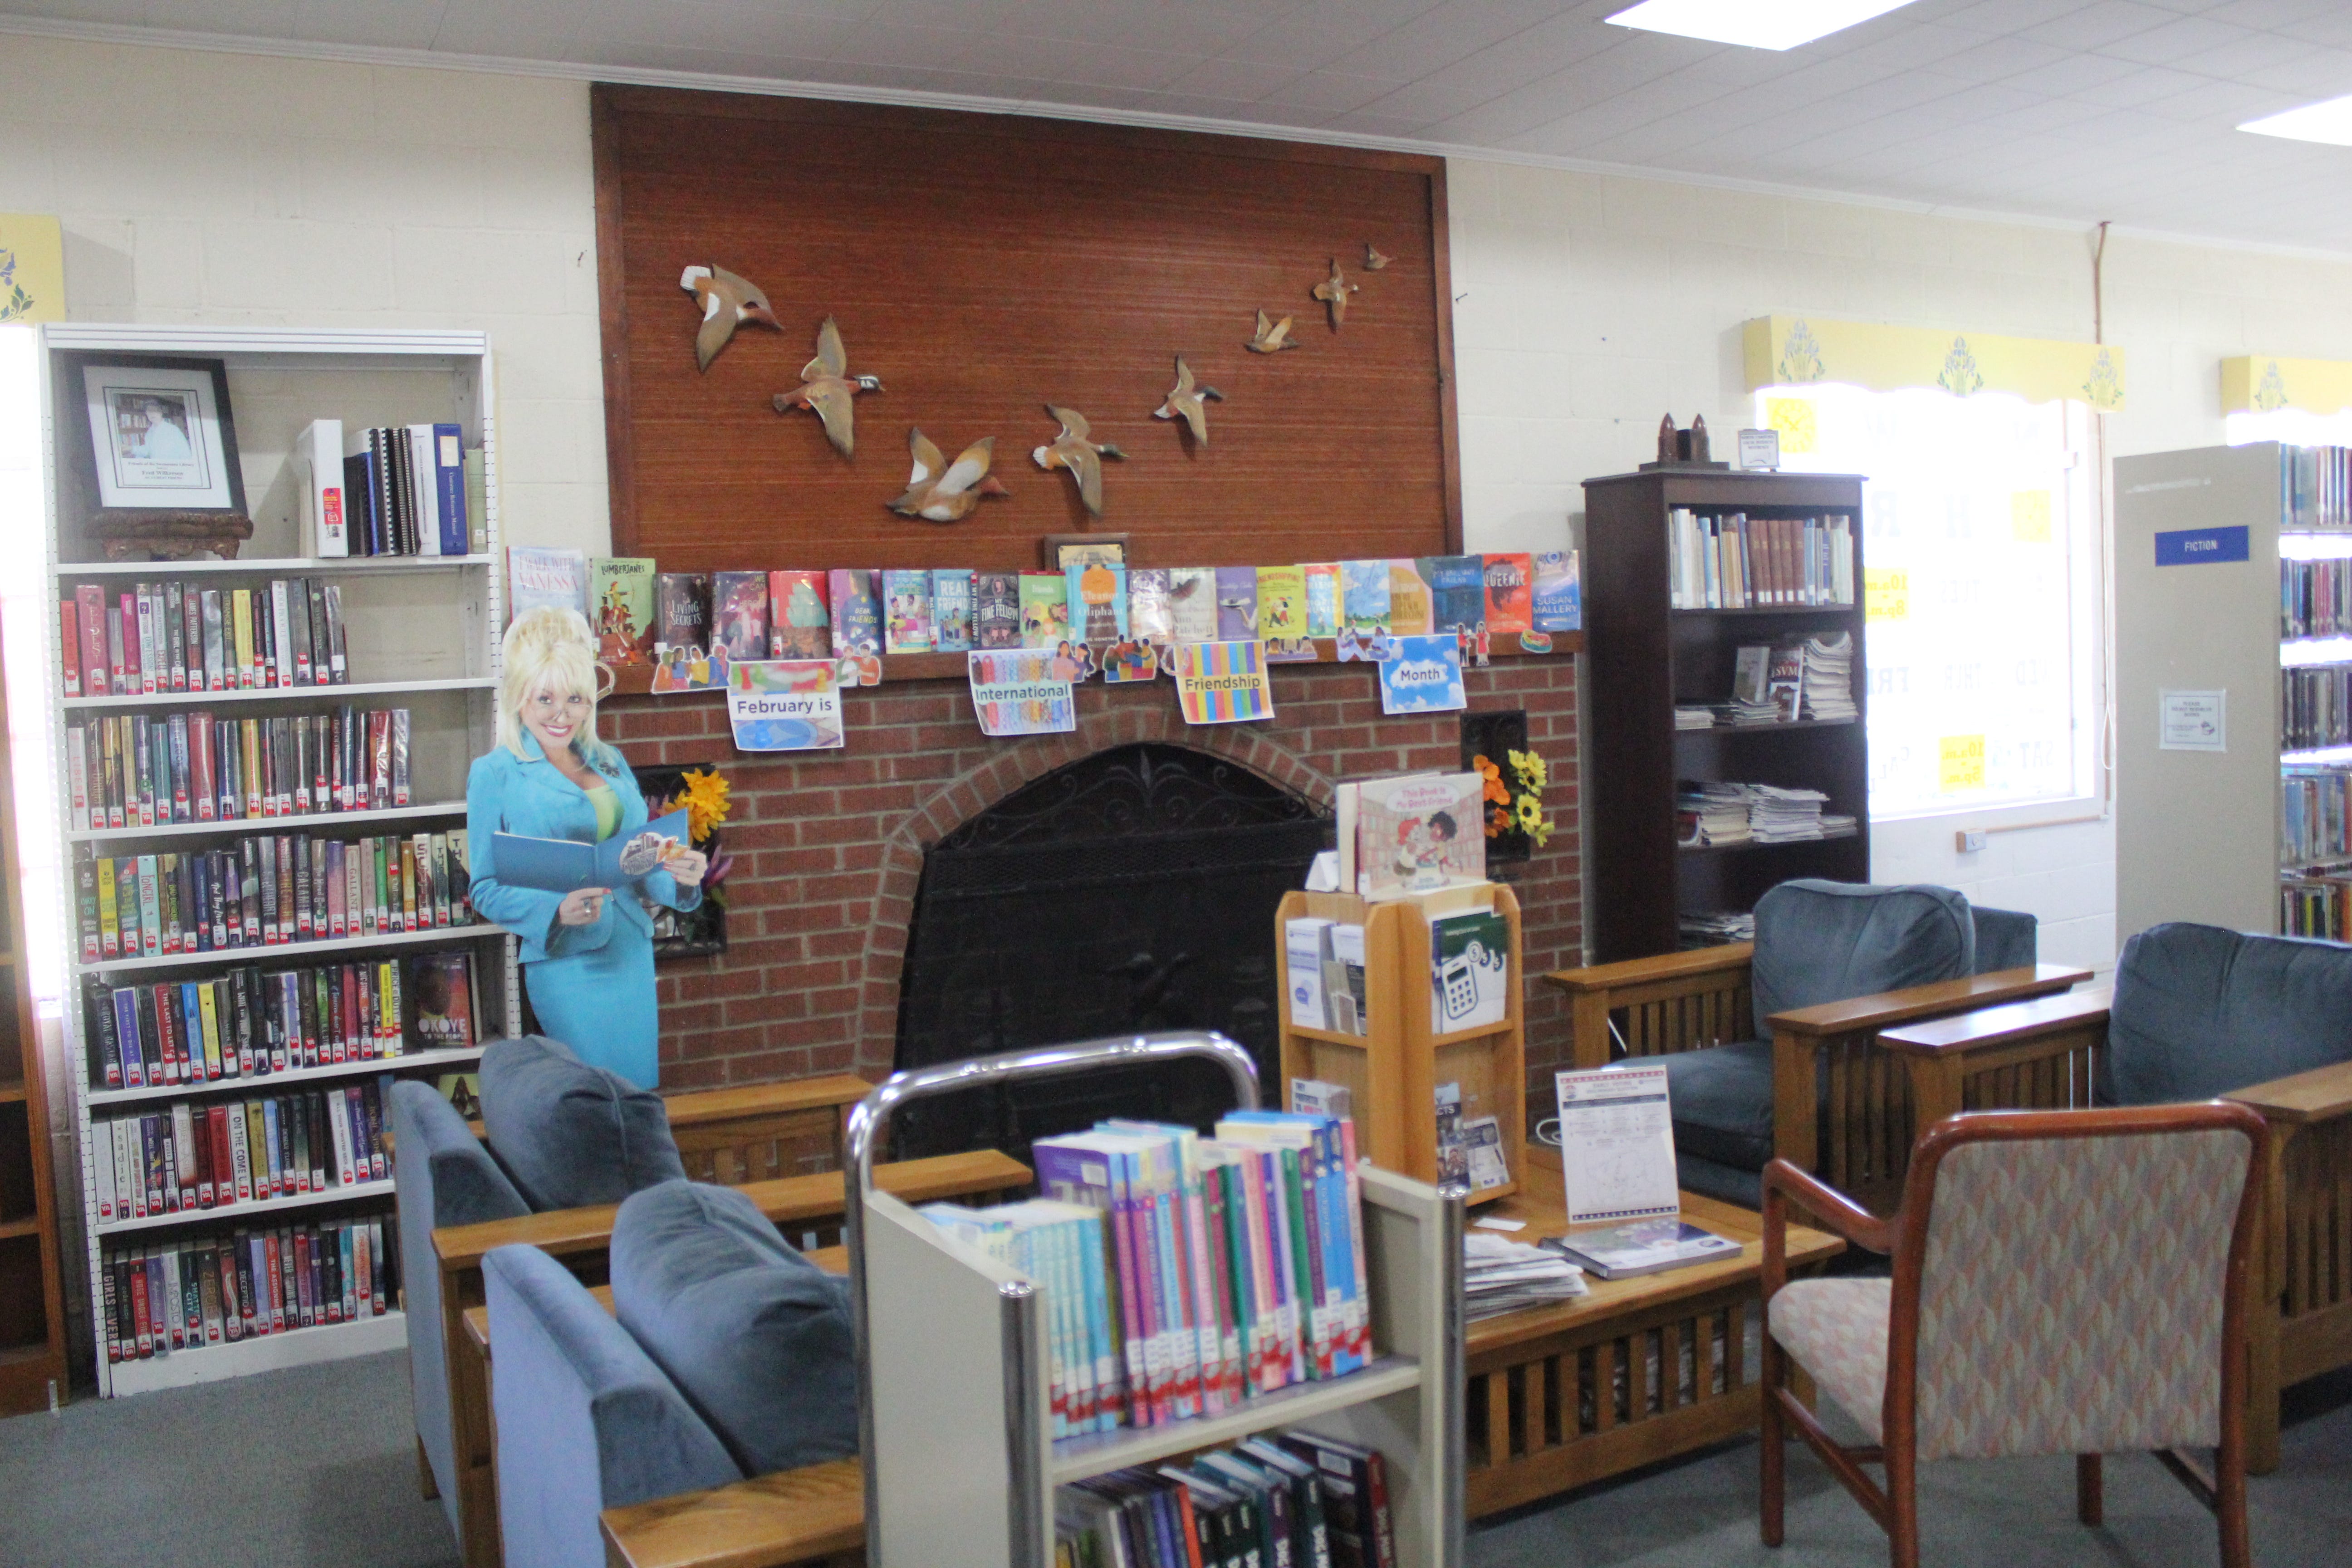 The Swannanoa Library serves 20,000 visitors each year, according to Buncombe County.